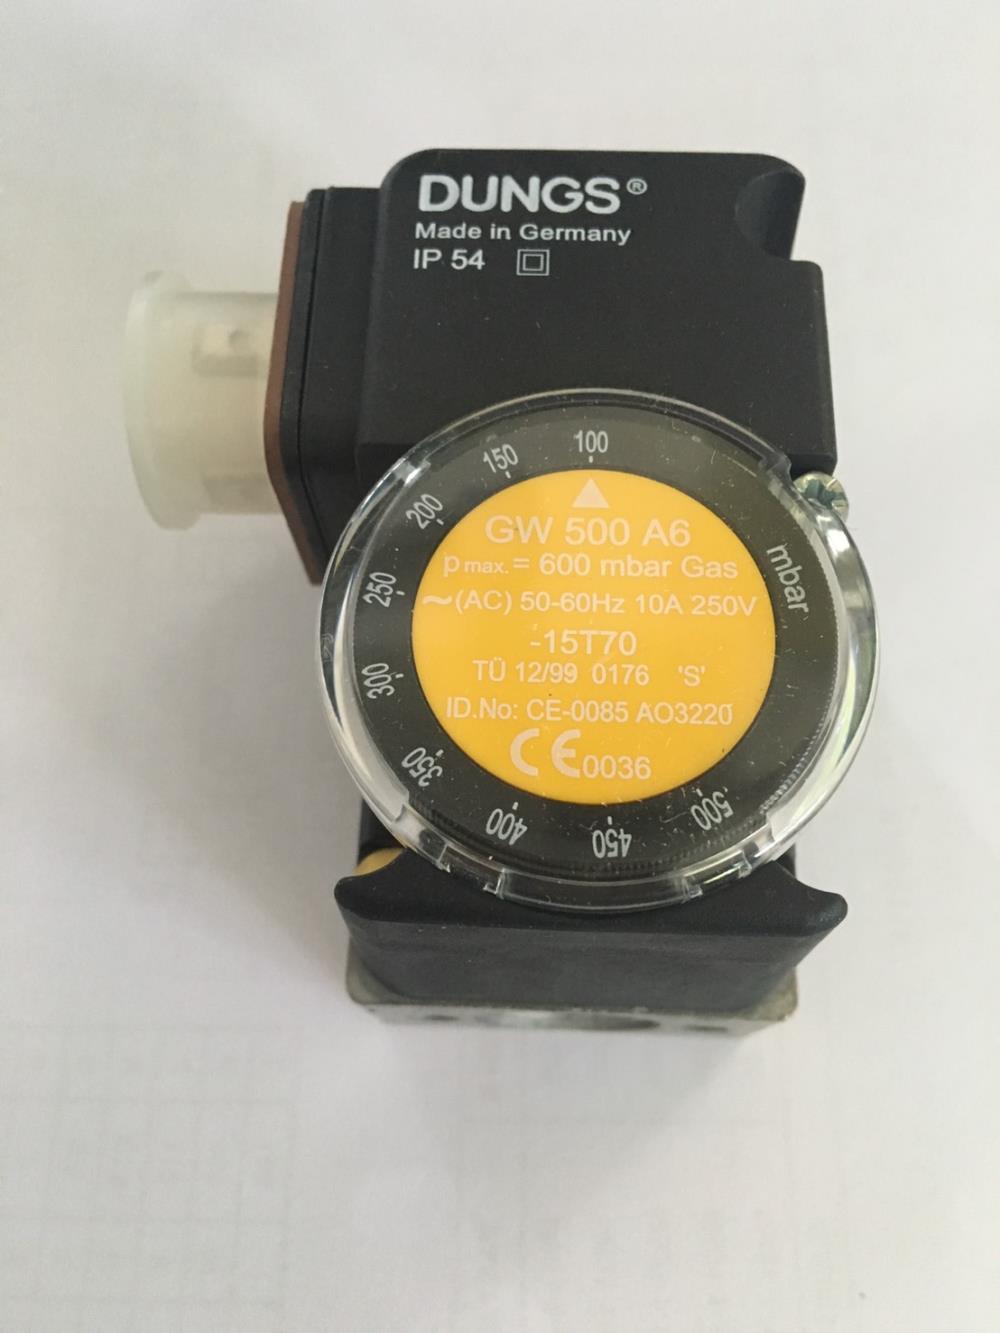 "DUNGS" PRESSURE SWITCH GW 500 A6,"DUNGS" PRESSURE SWITCH GW 500 A6,DUNGS",Instruments and Controls/Switches